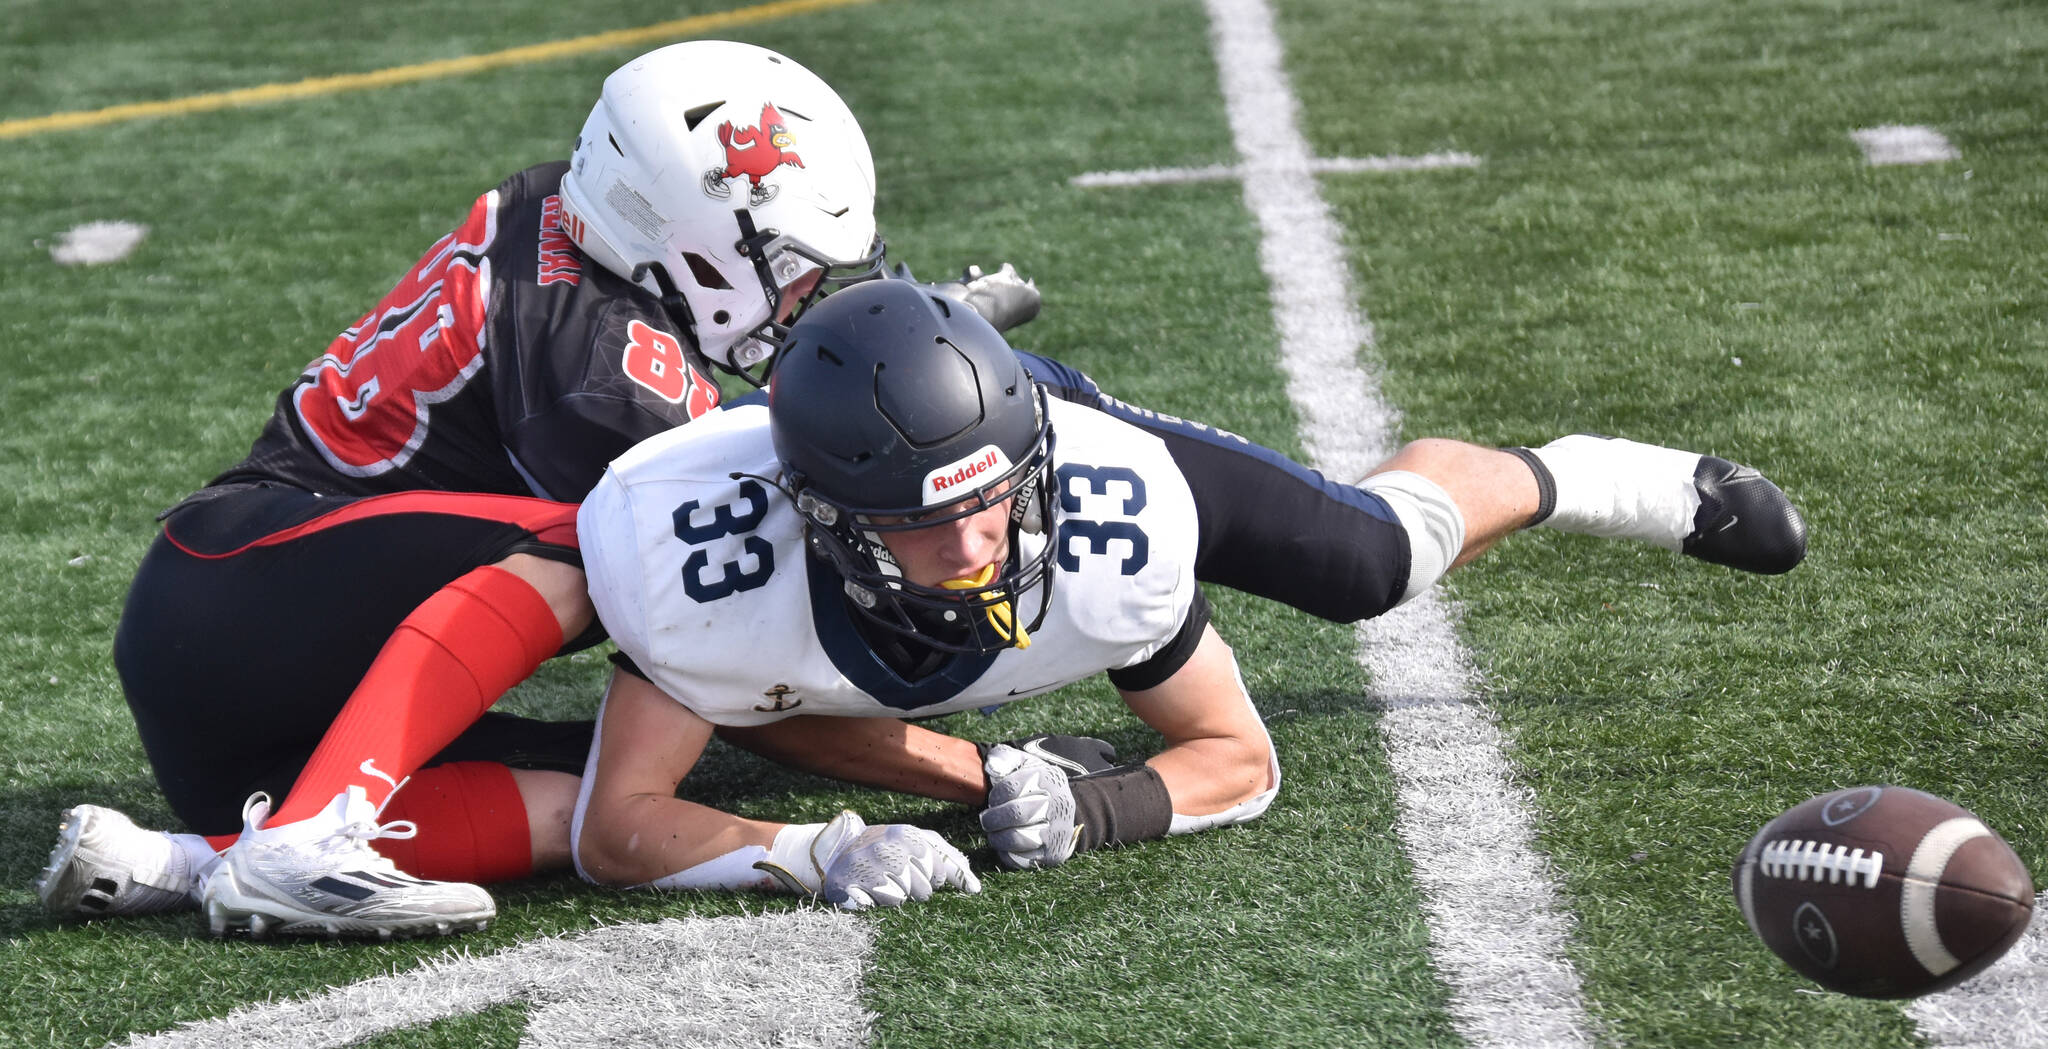 Homer’s Jake Tappan is taken down by Kenai Central’s Sawyer Vann while a live ball lies on the field Saturday, Sept. 2, 2023, at Ed Hollier Field at Kenai Central High School in Kenai, Alaska. The Kardinals would recover the ball. (Photo by Jeff Helminiak/Peninsula Clarion)